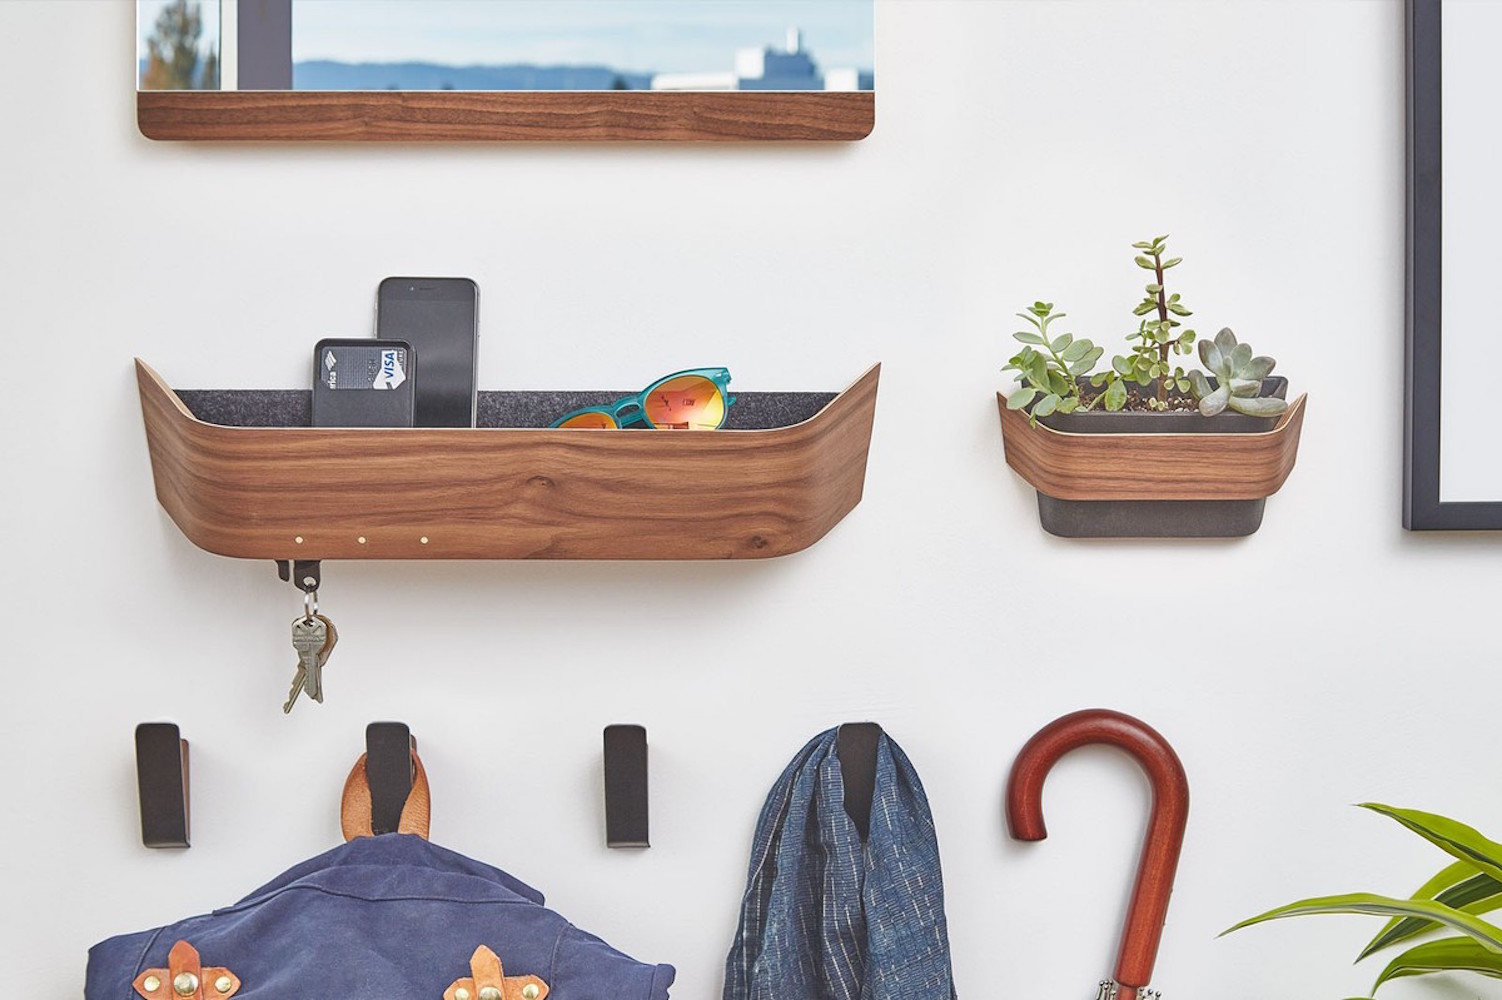 Grovemade Wood Catch-All wall-mounted basket holds keys, phones & everyday essentials